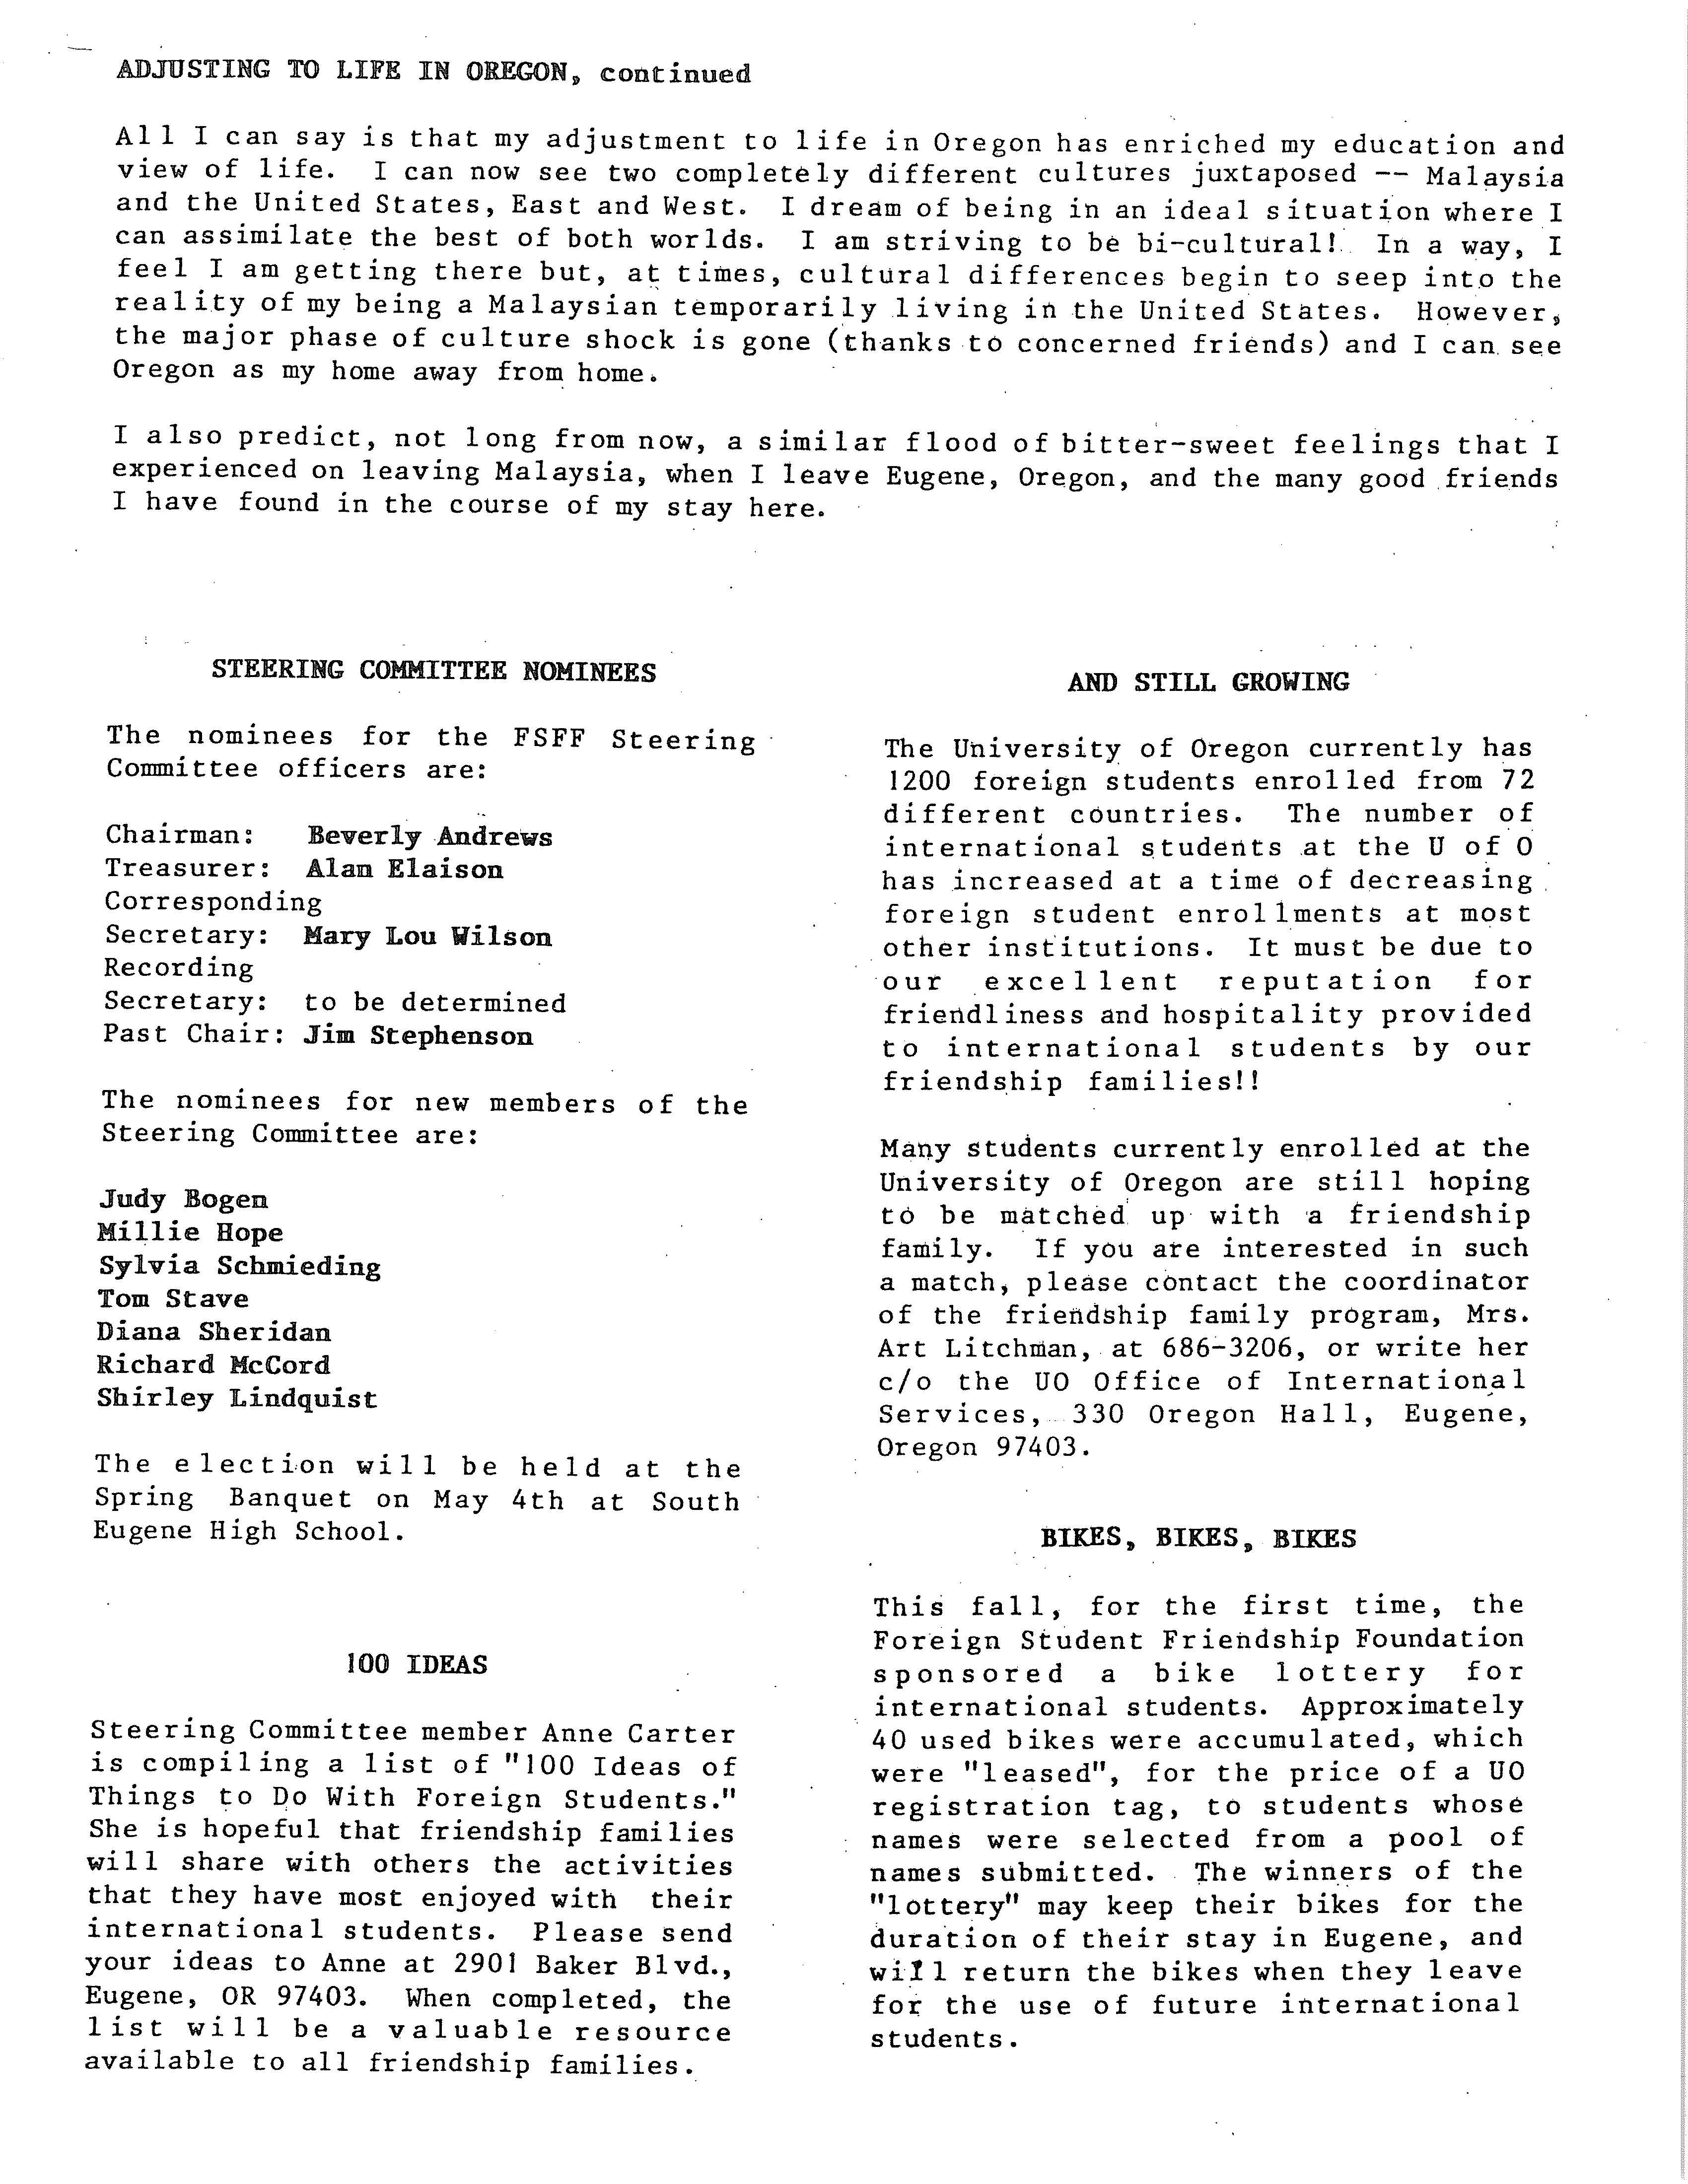 1984 Newsletter_Page_2